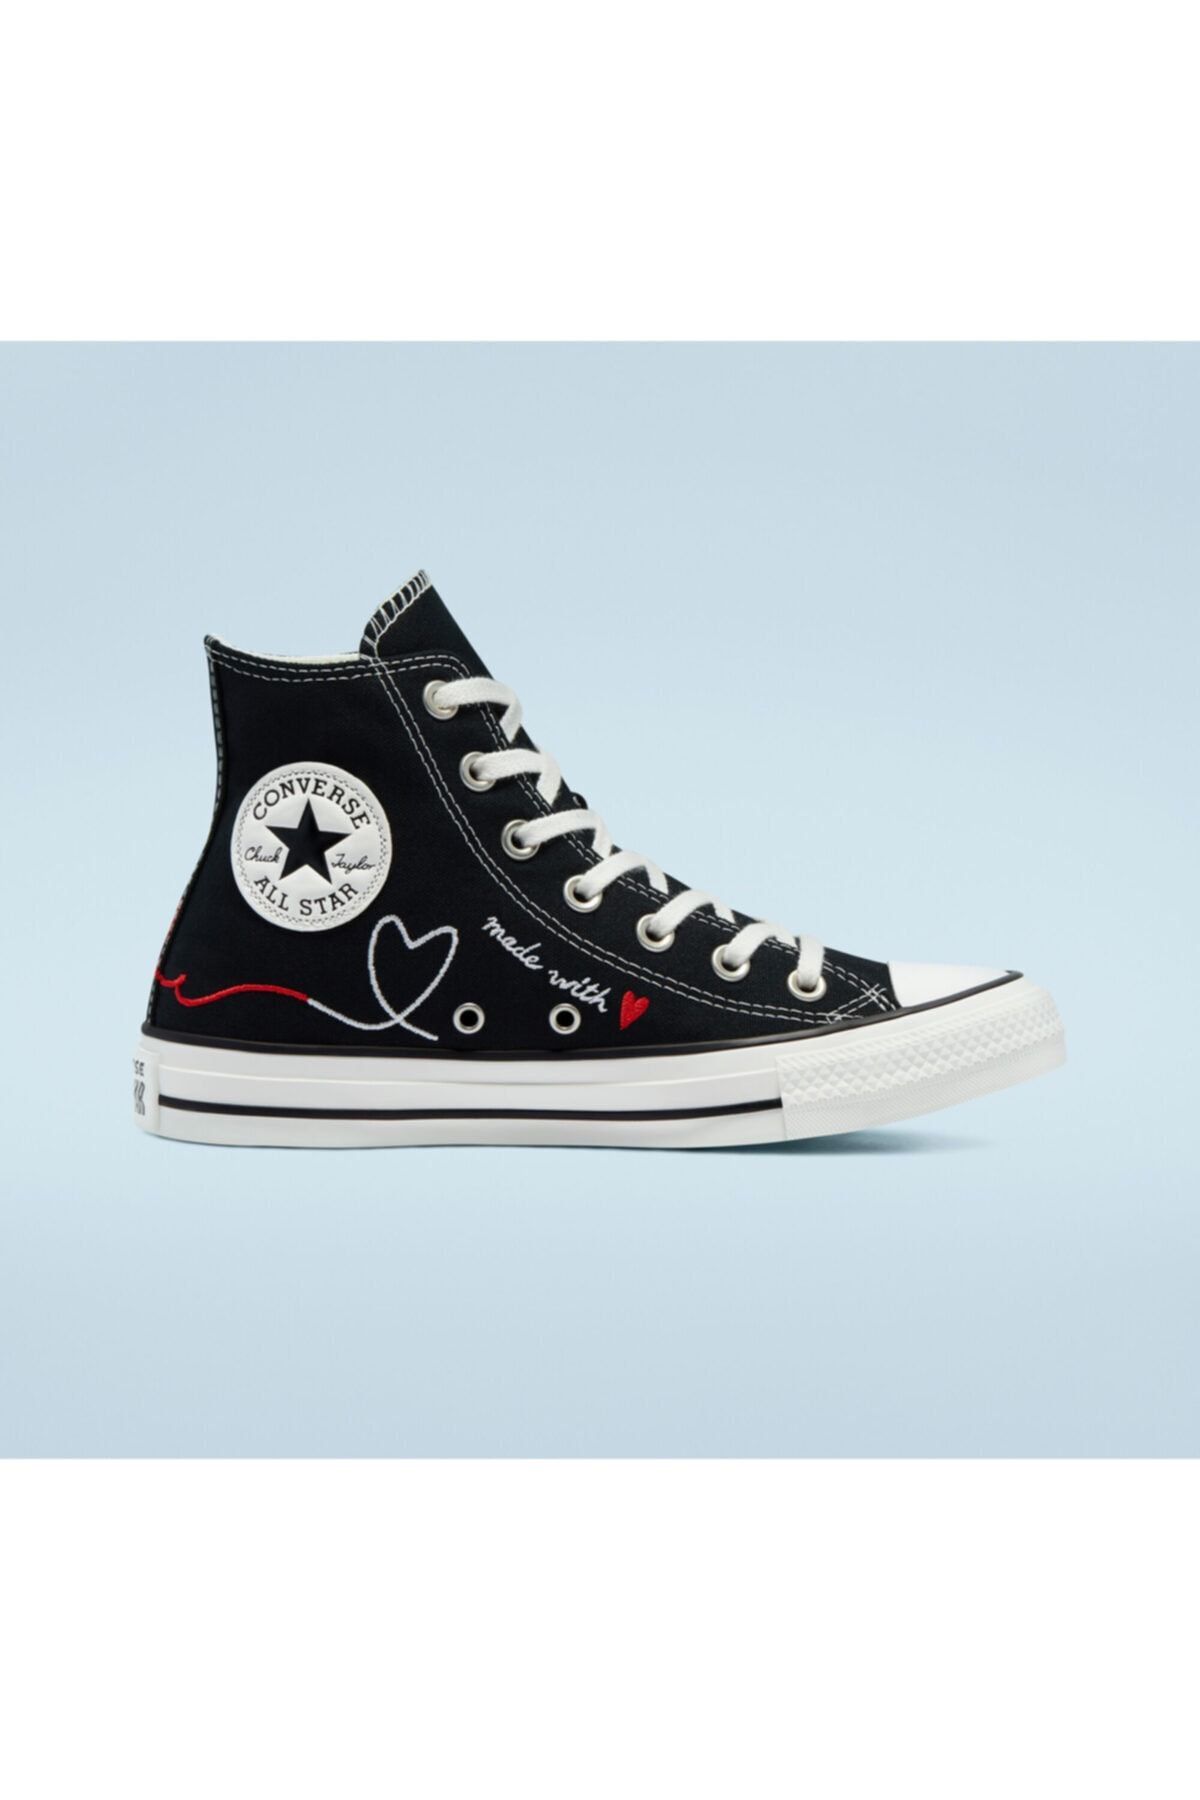 Converse Made With Love Chuck Taylor All Star